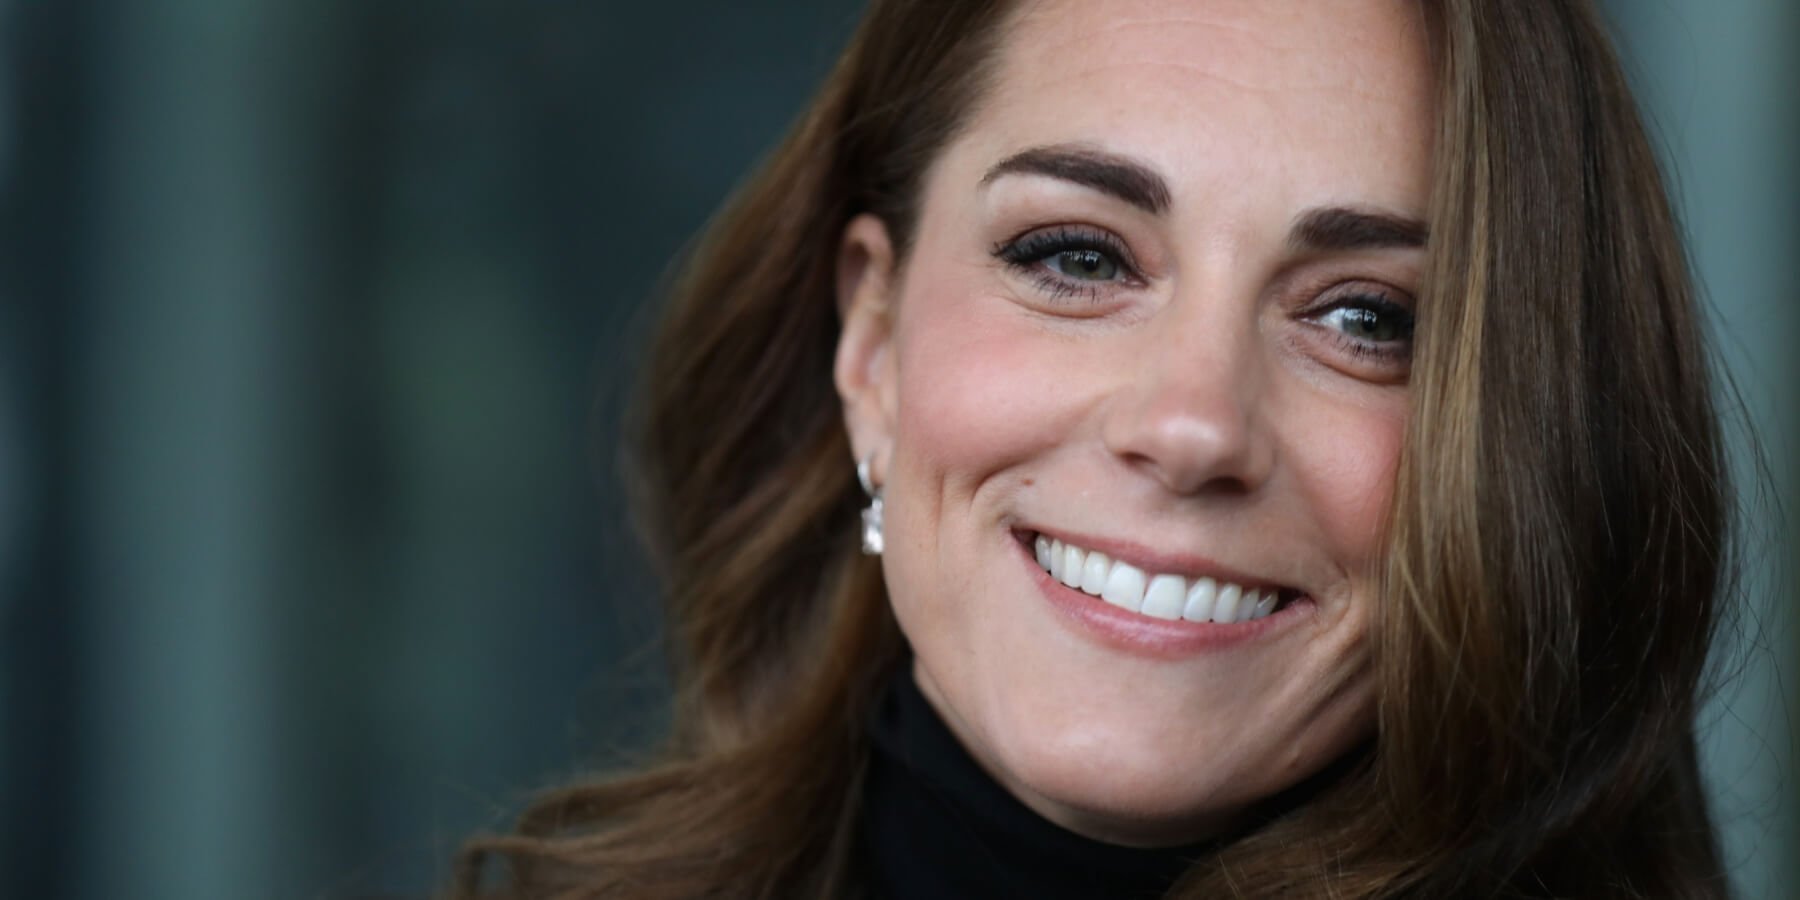 Kate Middleton left The London Clinic shrouded in secrecy after a two-week hospital stay following surgery